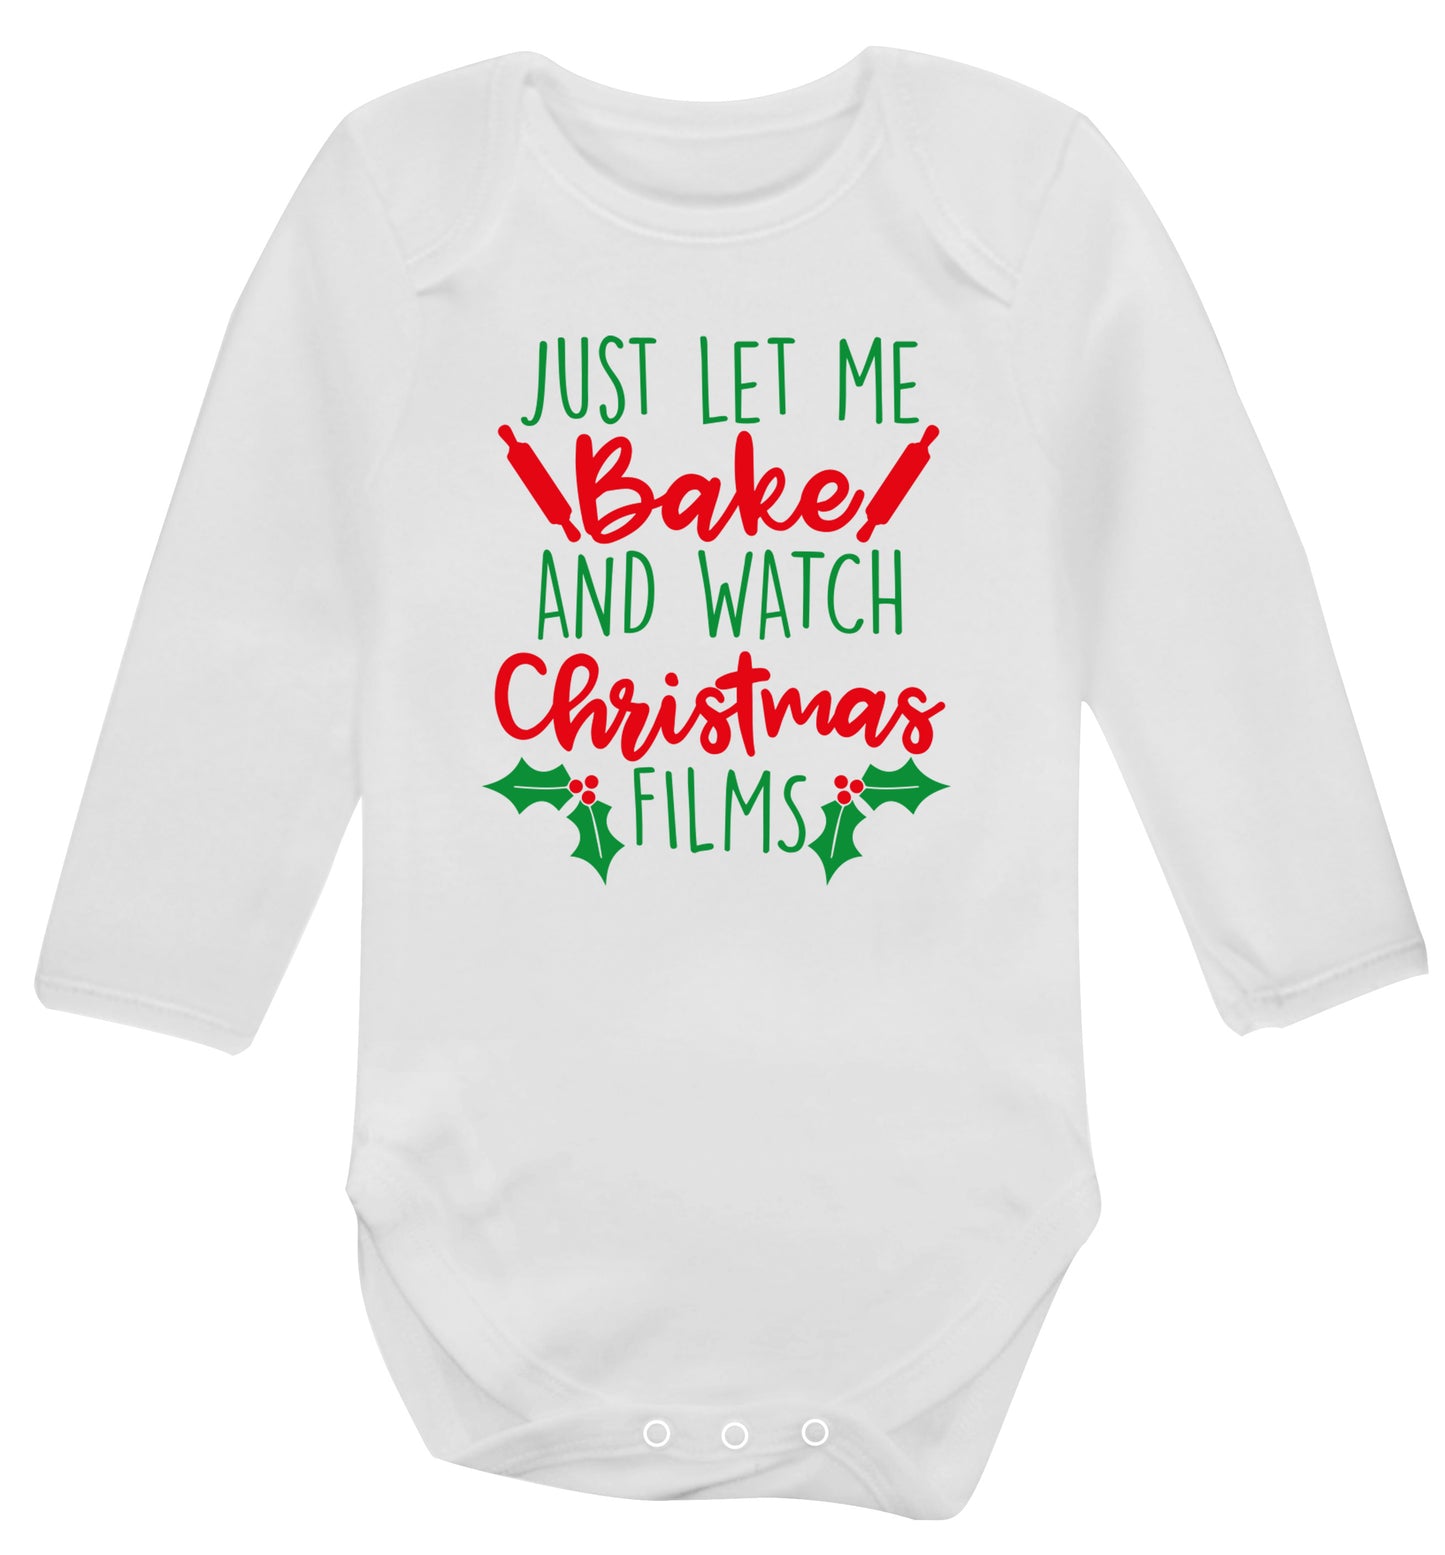 Just let me bake and watch Christmas films Baby Vest long sleeved white 6-12 months